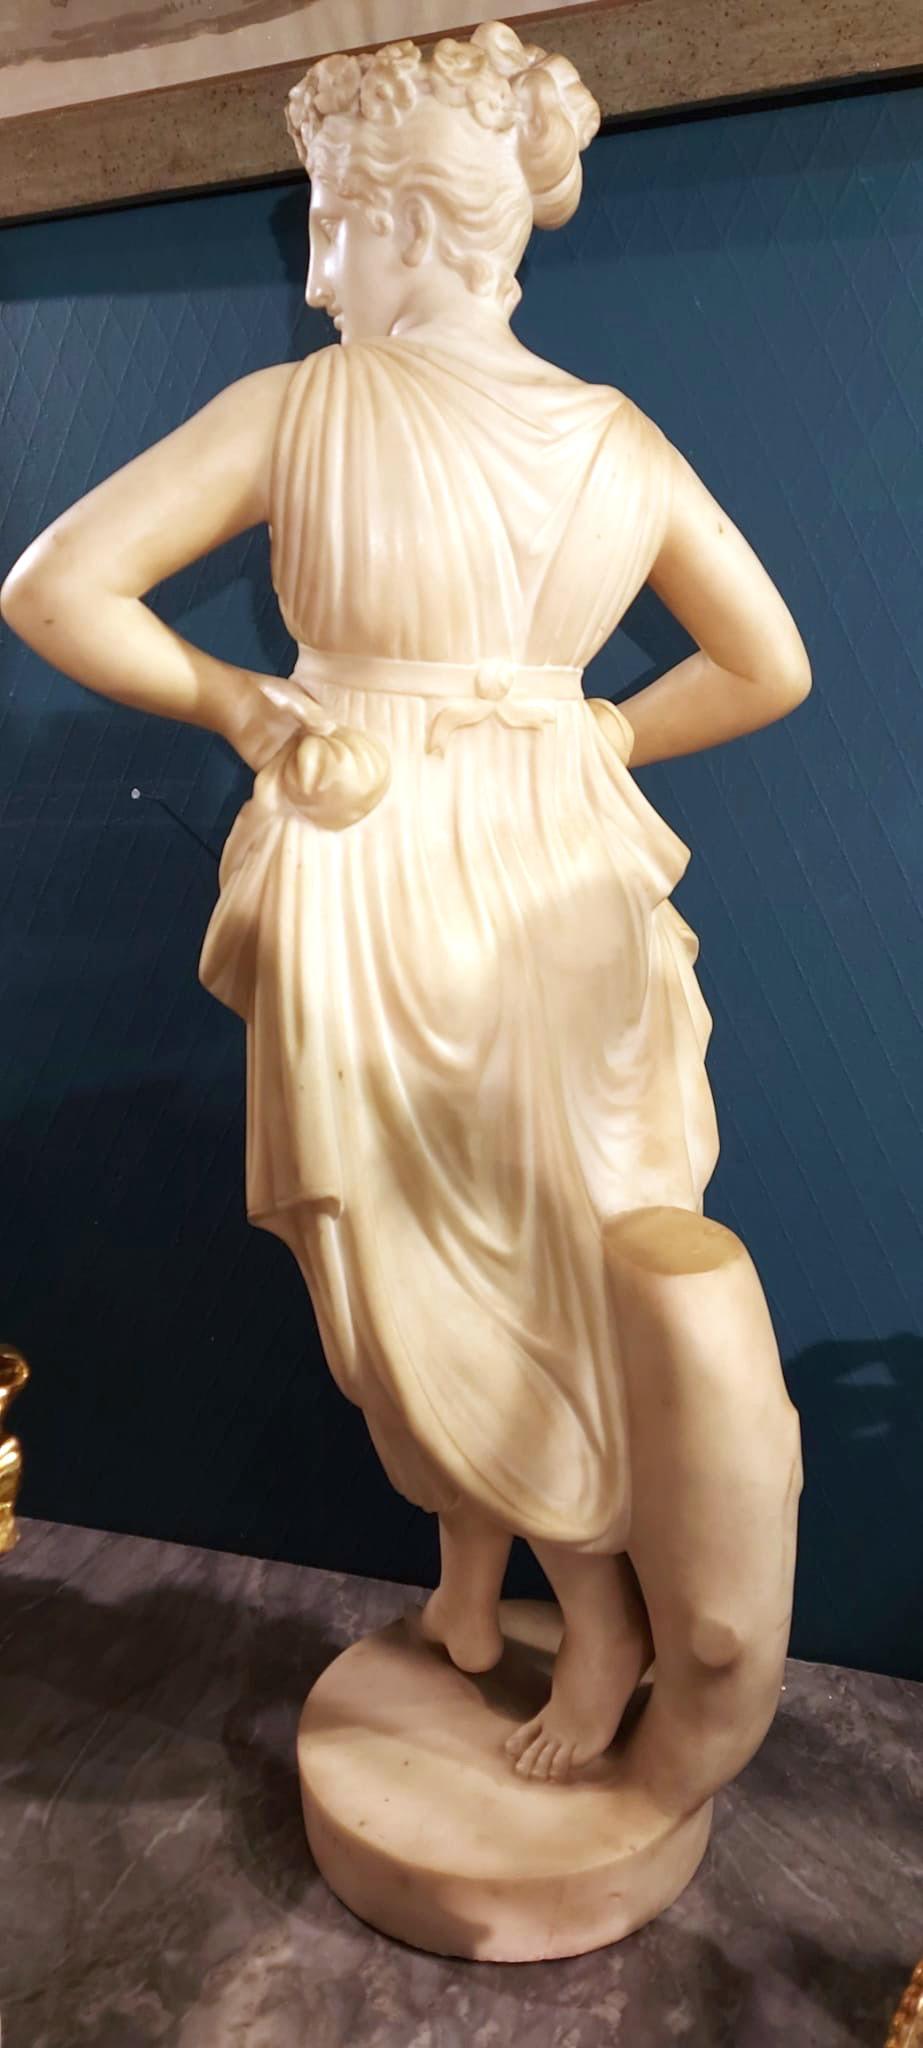  Neoclassical White Marble Sculpture of the DANCER  1870  6